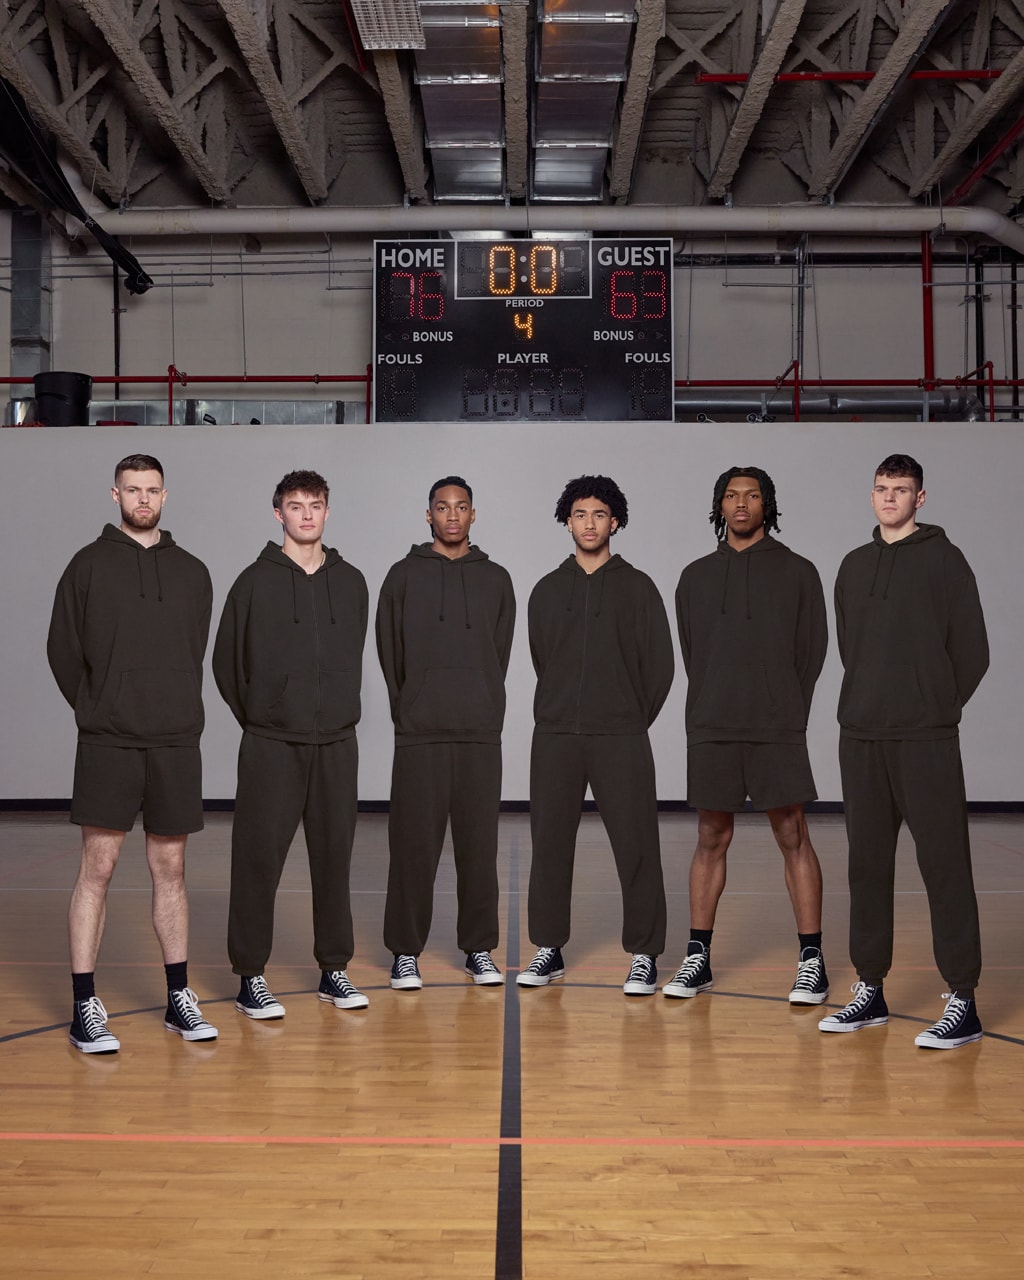 Kim Kardashian links up with March Madness stars for latest Skims product  launch as duo model ahead of tournament